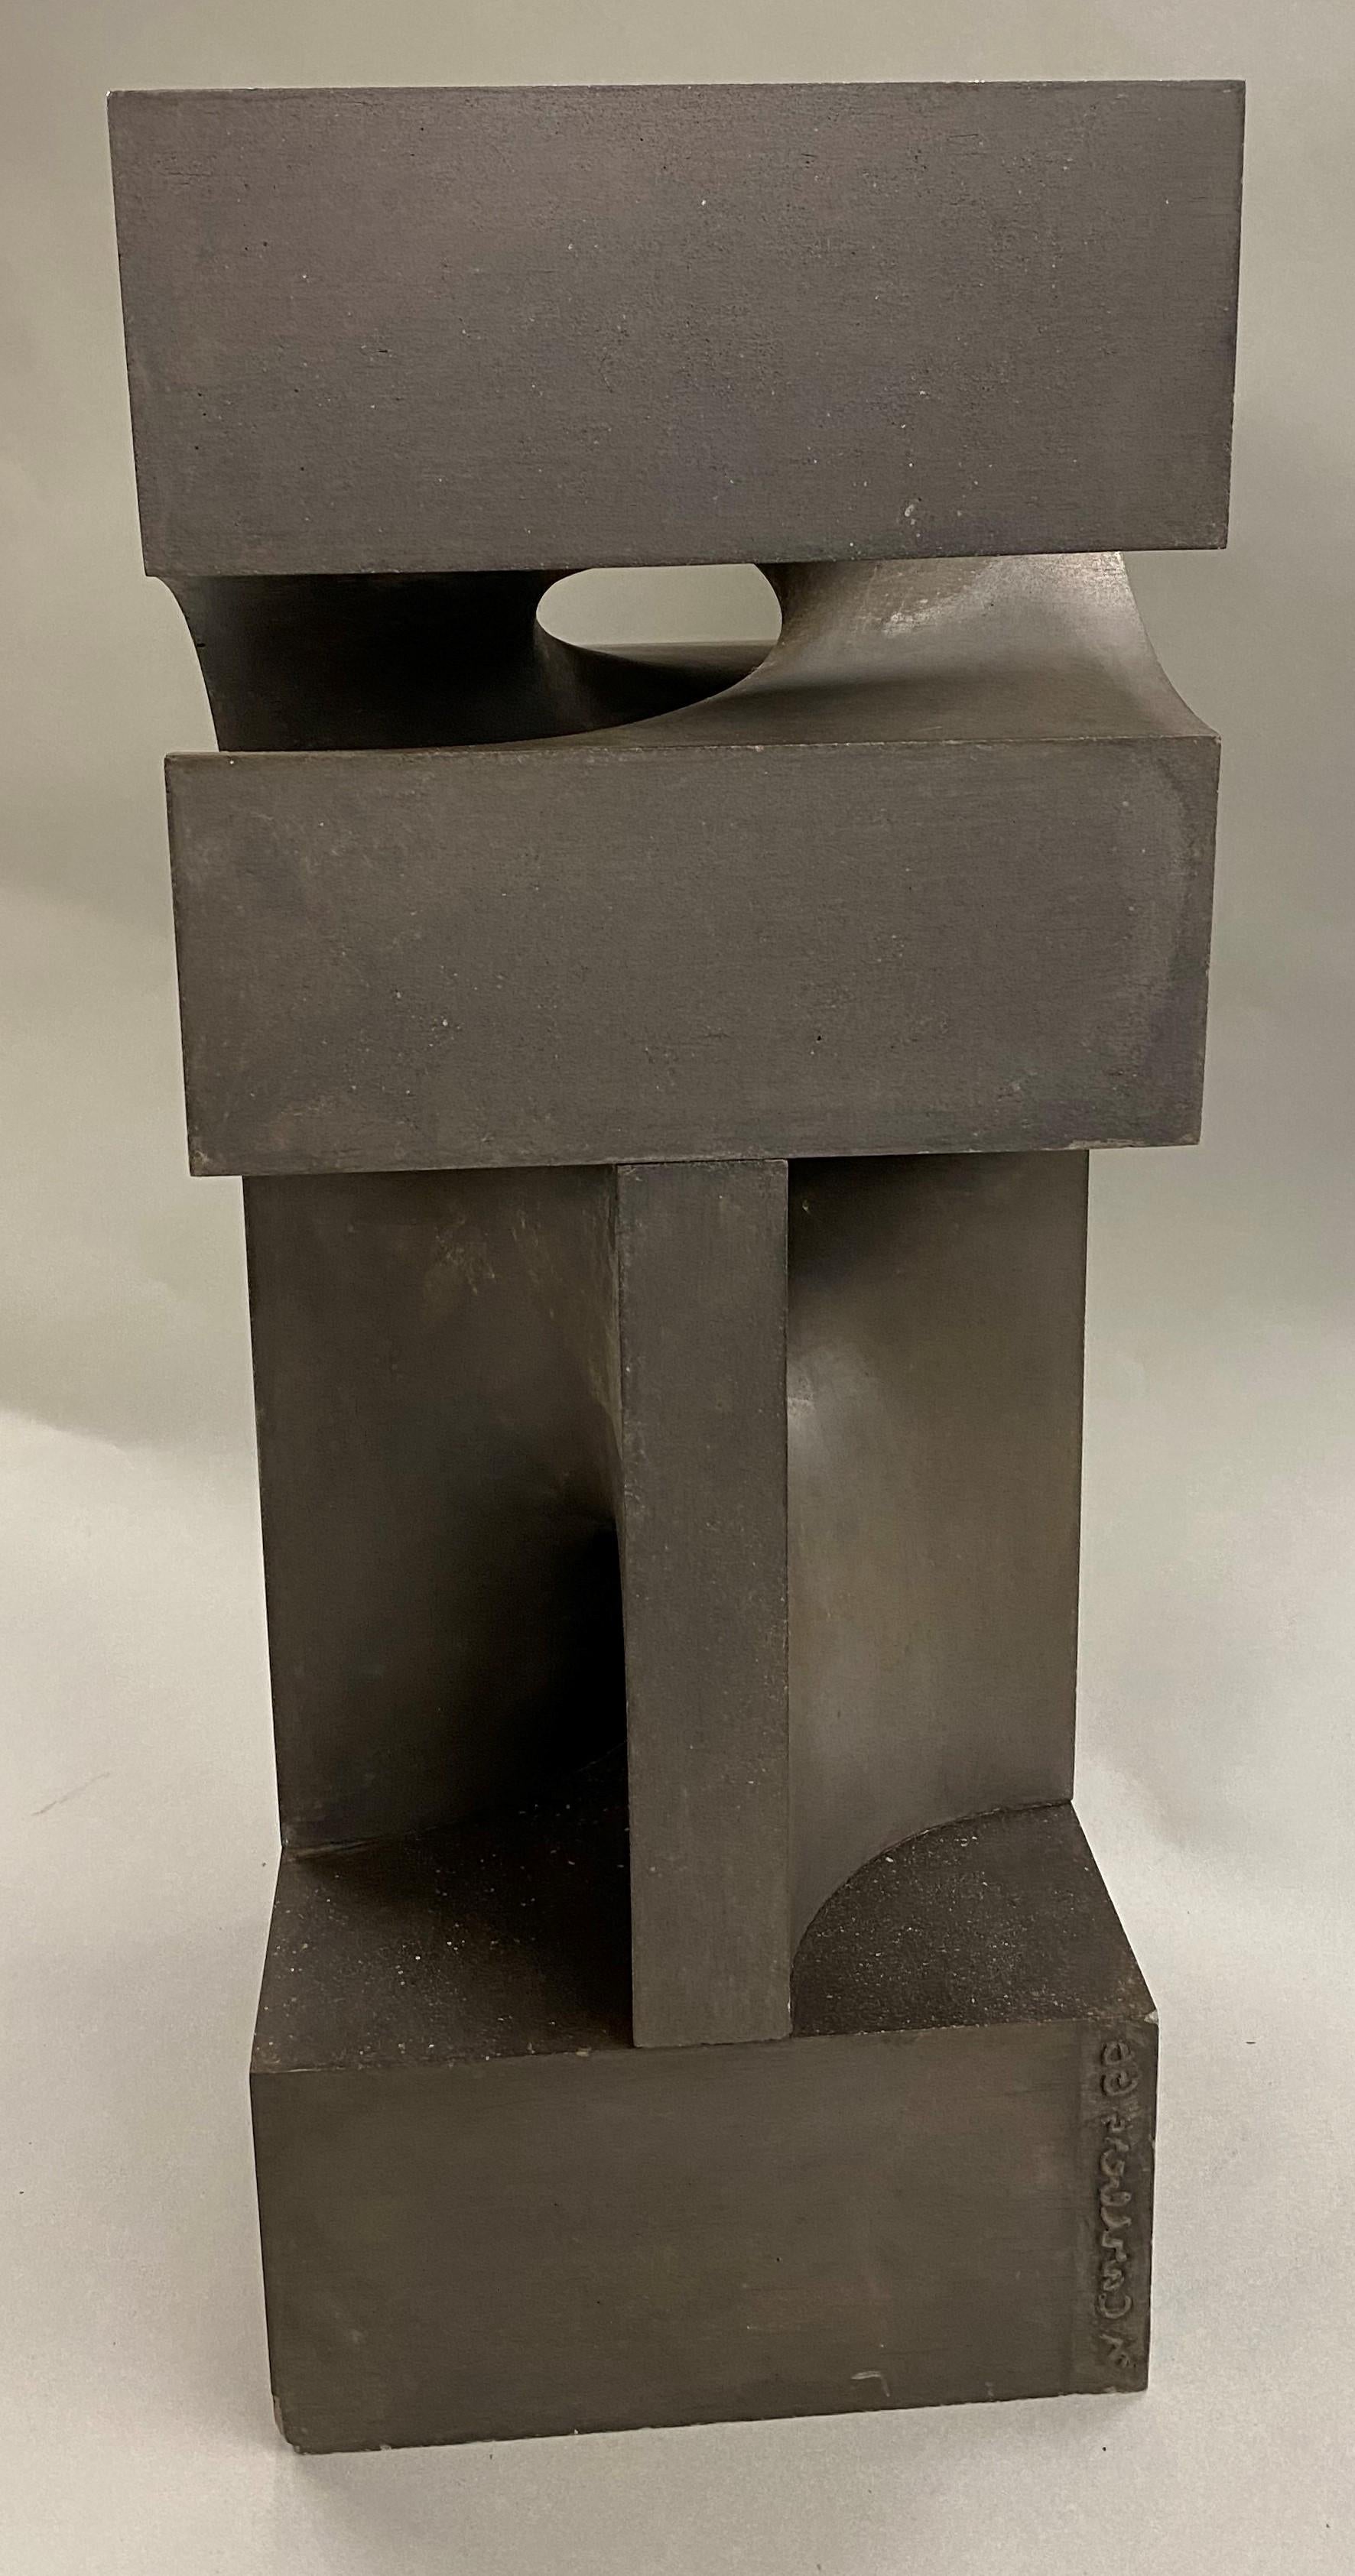 A fine abstract slate sculpture in geometric form by American sculptor Norman Kenneth Carlberg (1928-2018).Carlberg was born in Roseau, Minnesota, he studied at Brainerd Junior College, the Minneapolis School of Art, the University of Illinois and